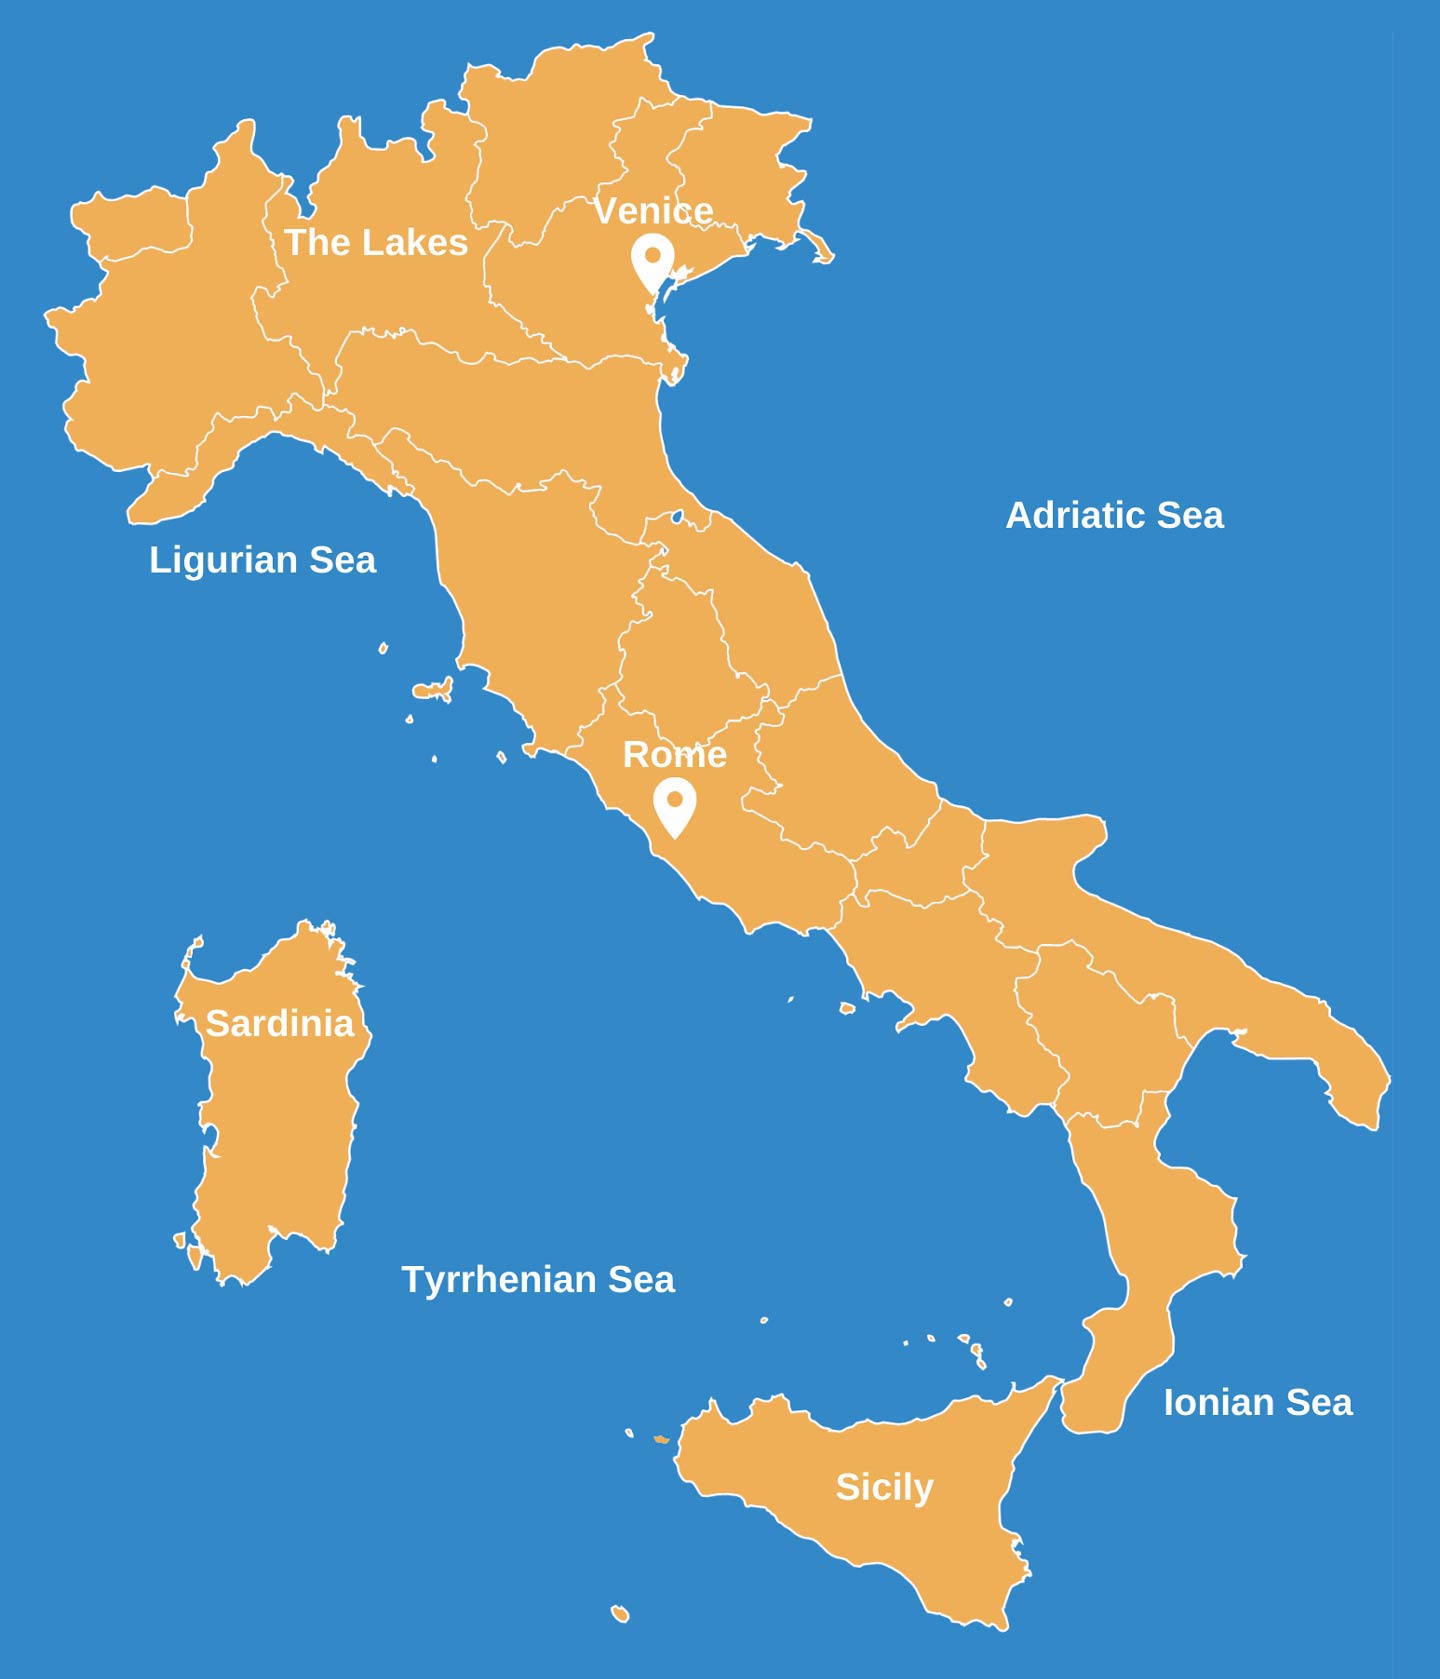 An infographic showing a map of Italy with Rome, Venice, the lakes, islands, Adriatic, Ionian, Tyrrhenian, and Ligurian Seas labeled